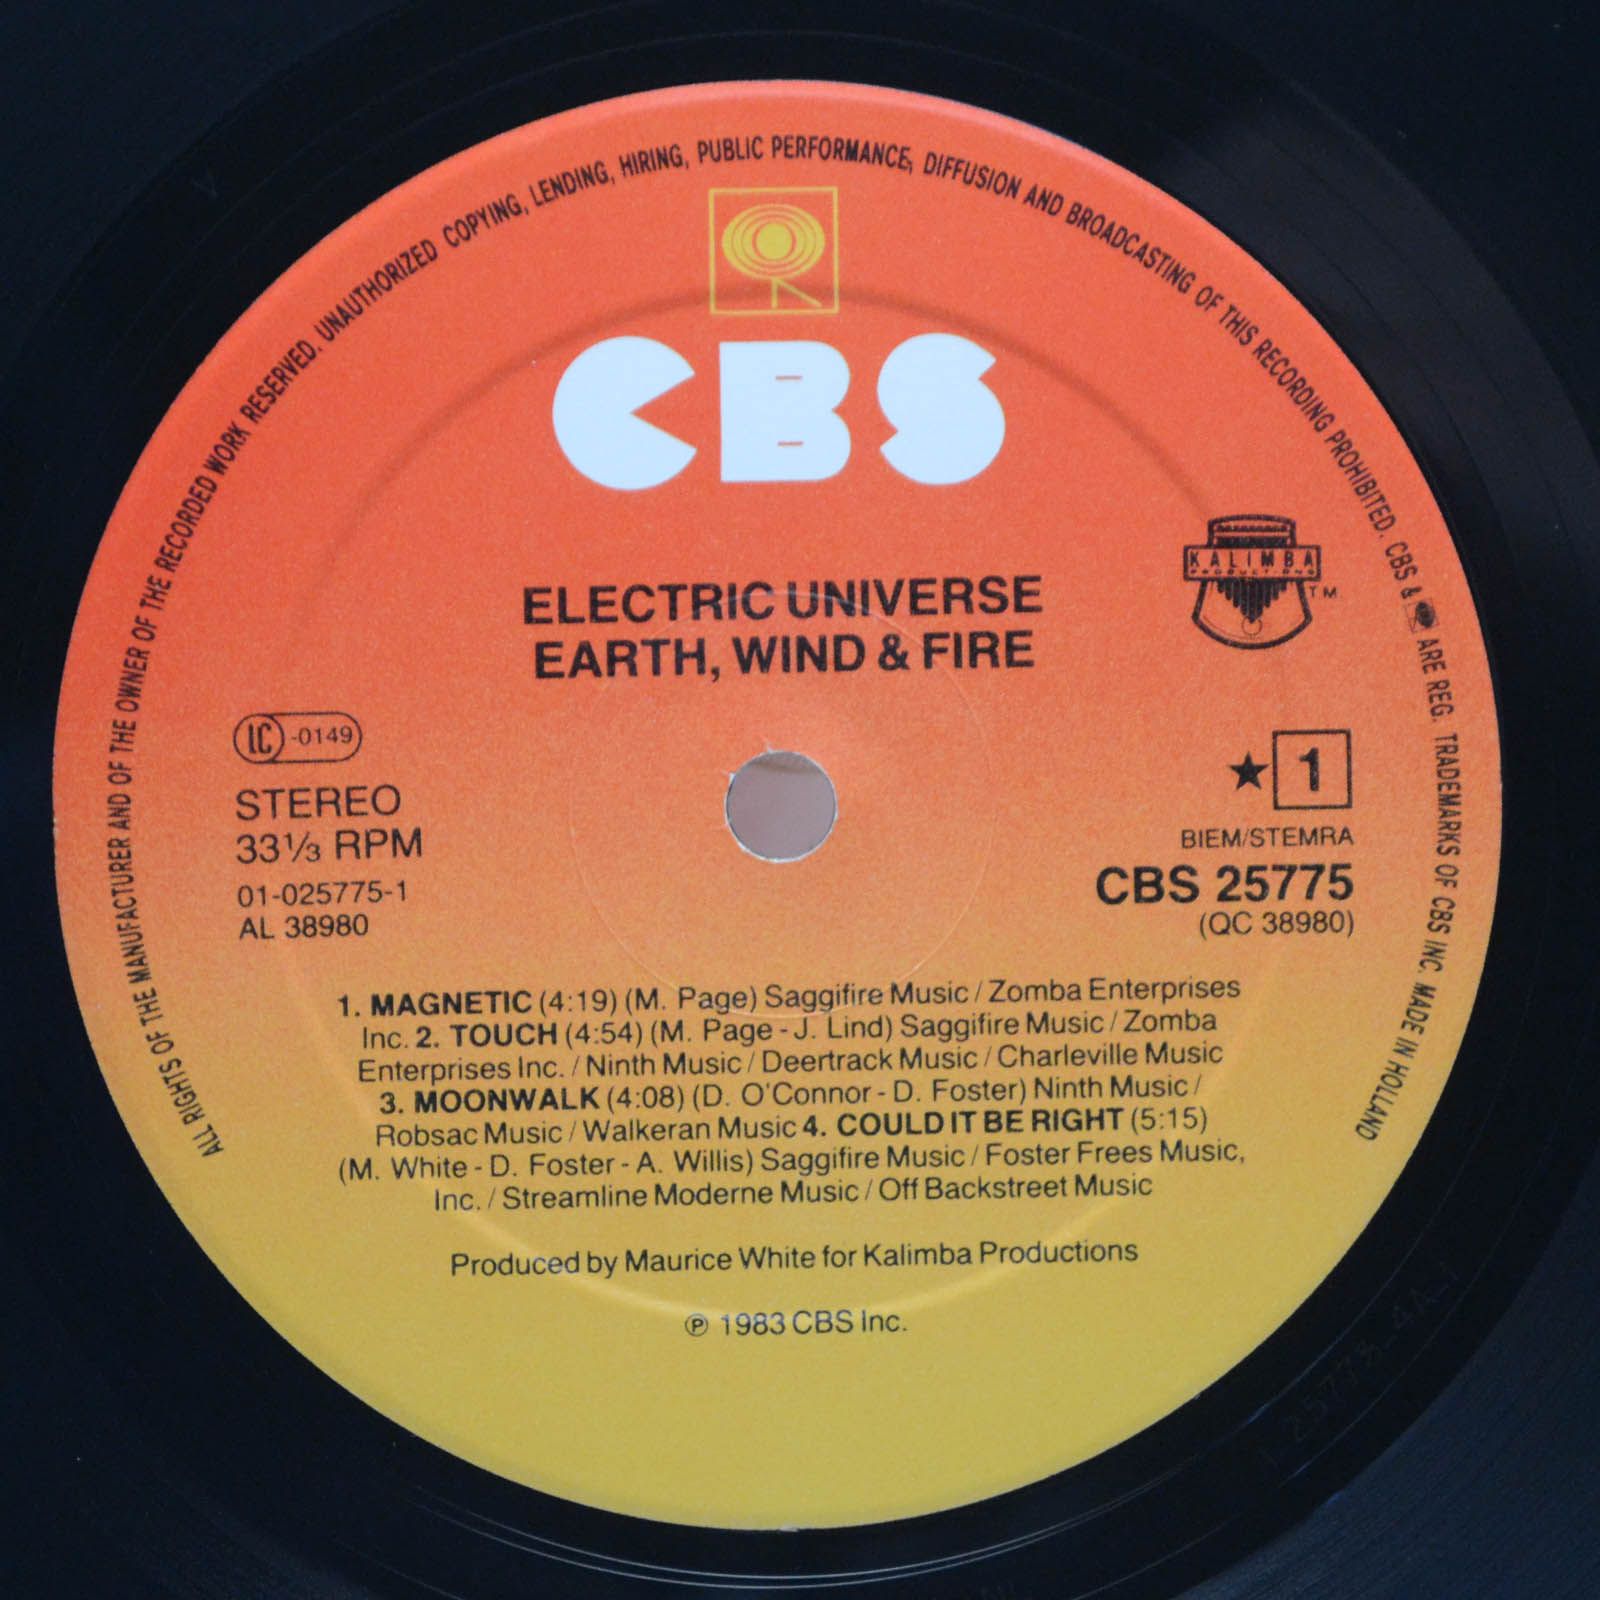 Earth, Wind & Fire — Electric Universe, 1983